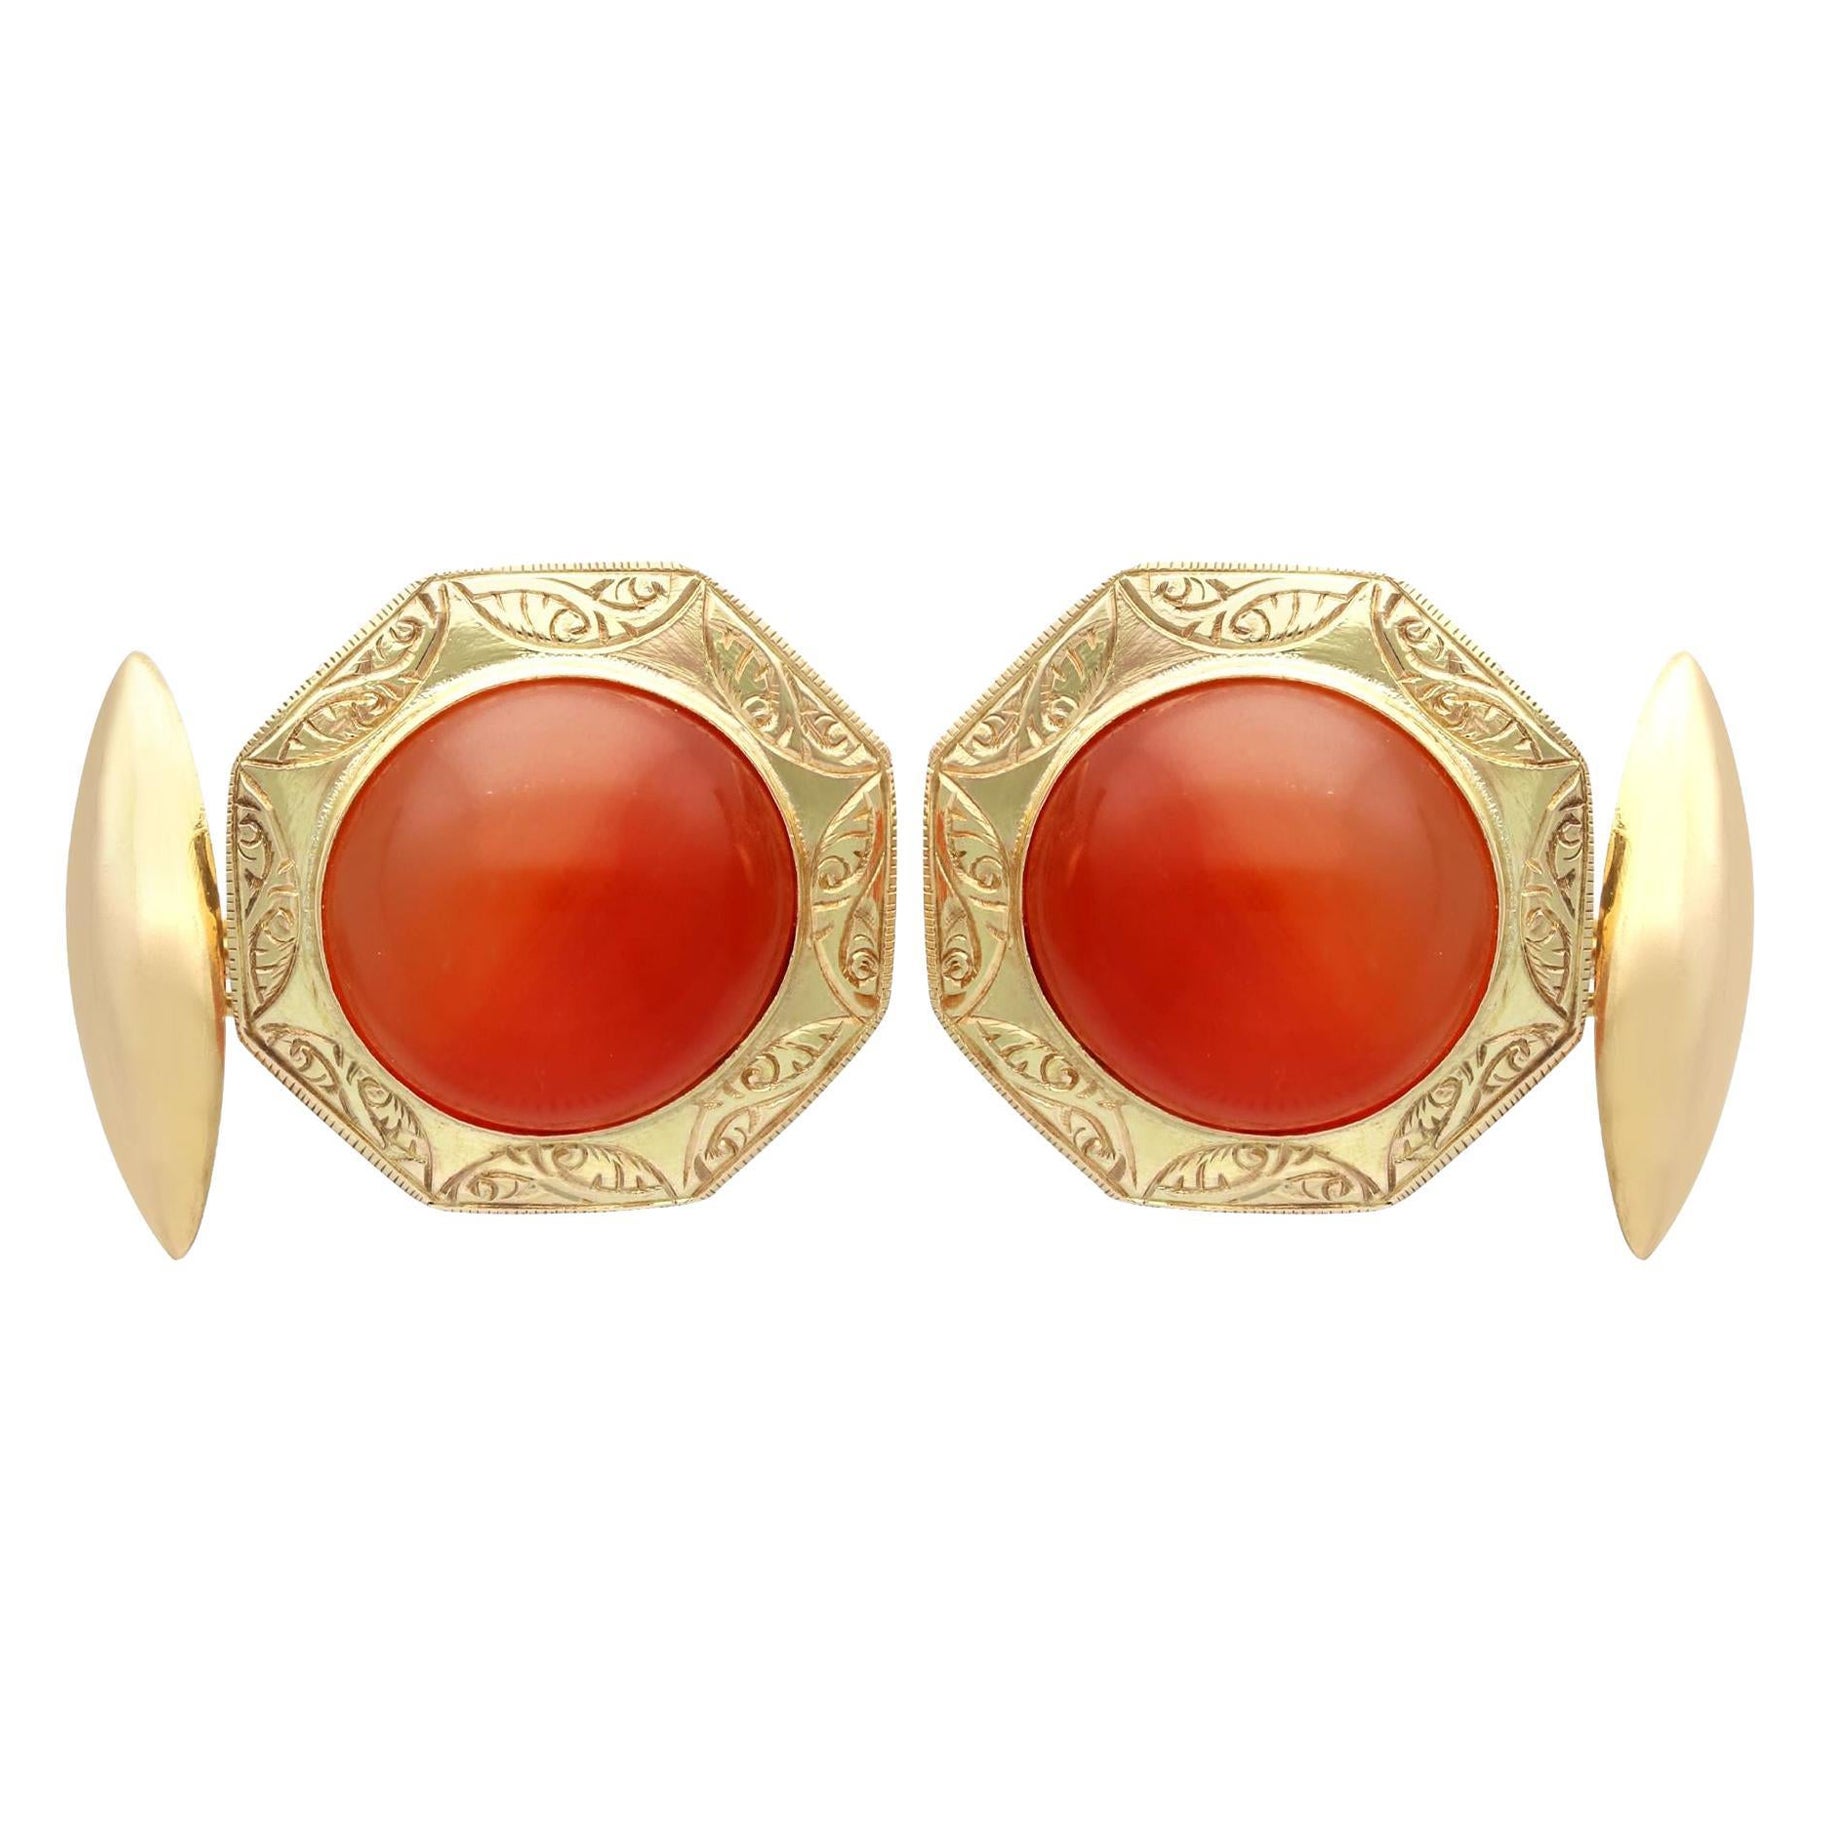 Antique 9.78 Carat Carnelian and Yellow Gold Cufflinks, Circa 1890 For Sale